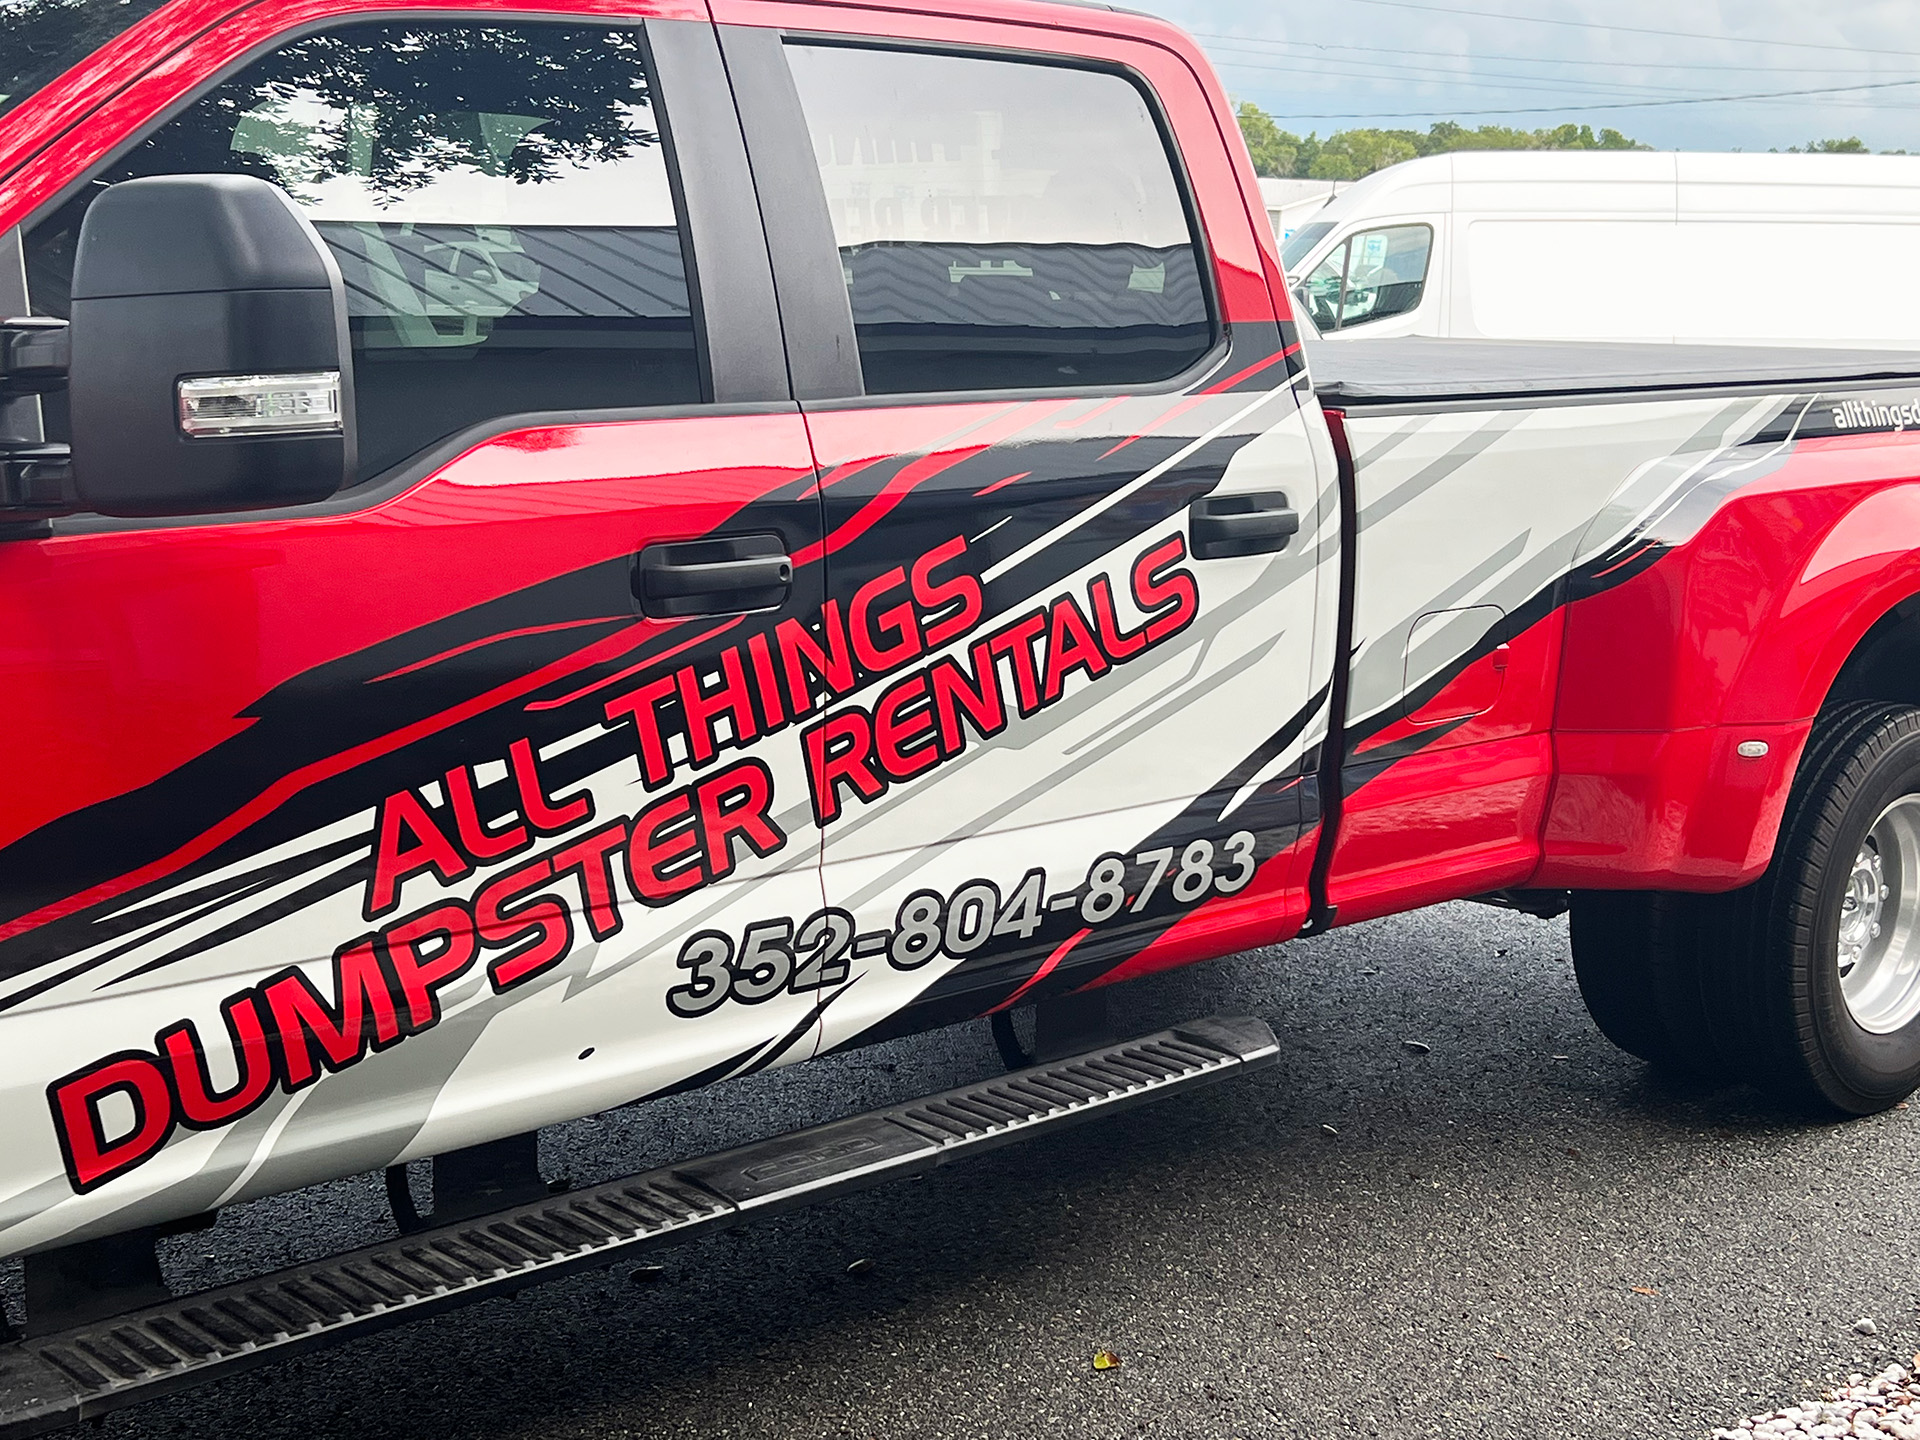 Silver Springs FL Moving Dumpsters